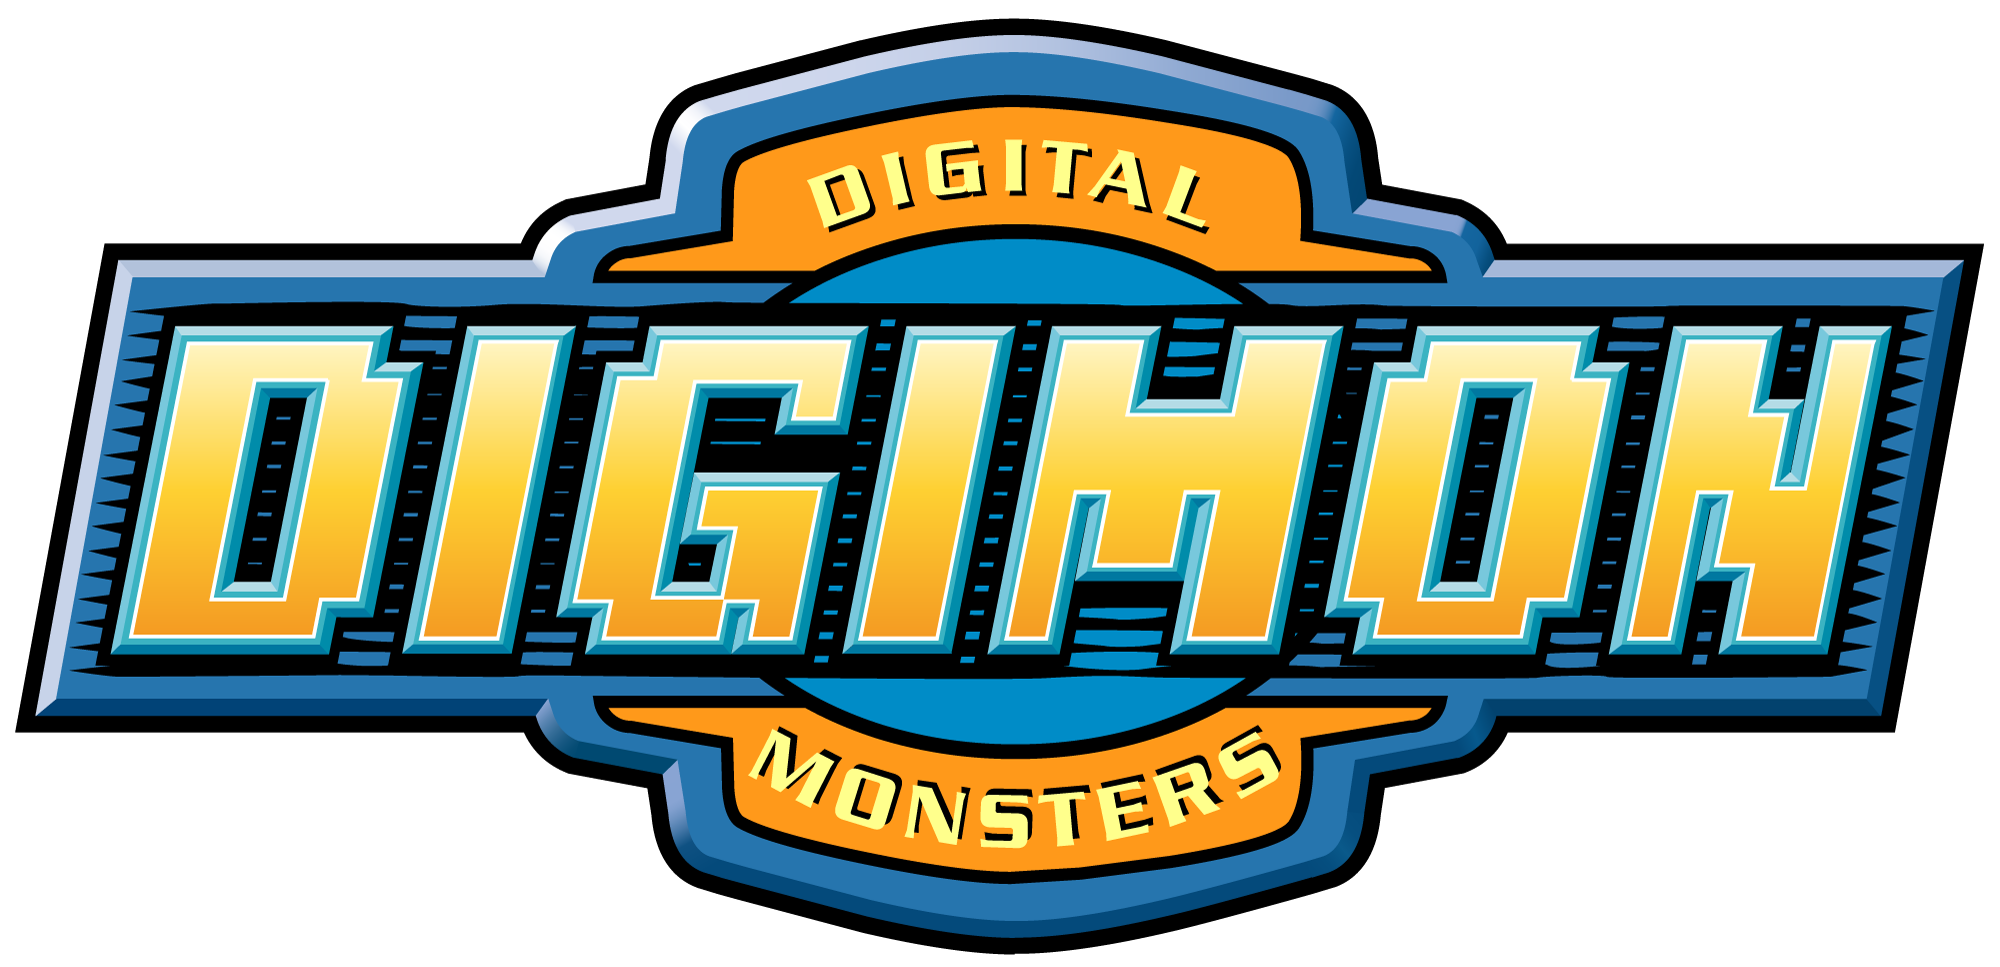 digimon_logo_vector_by_3prsta-d9a4yb9.png